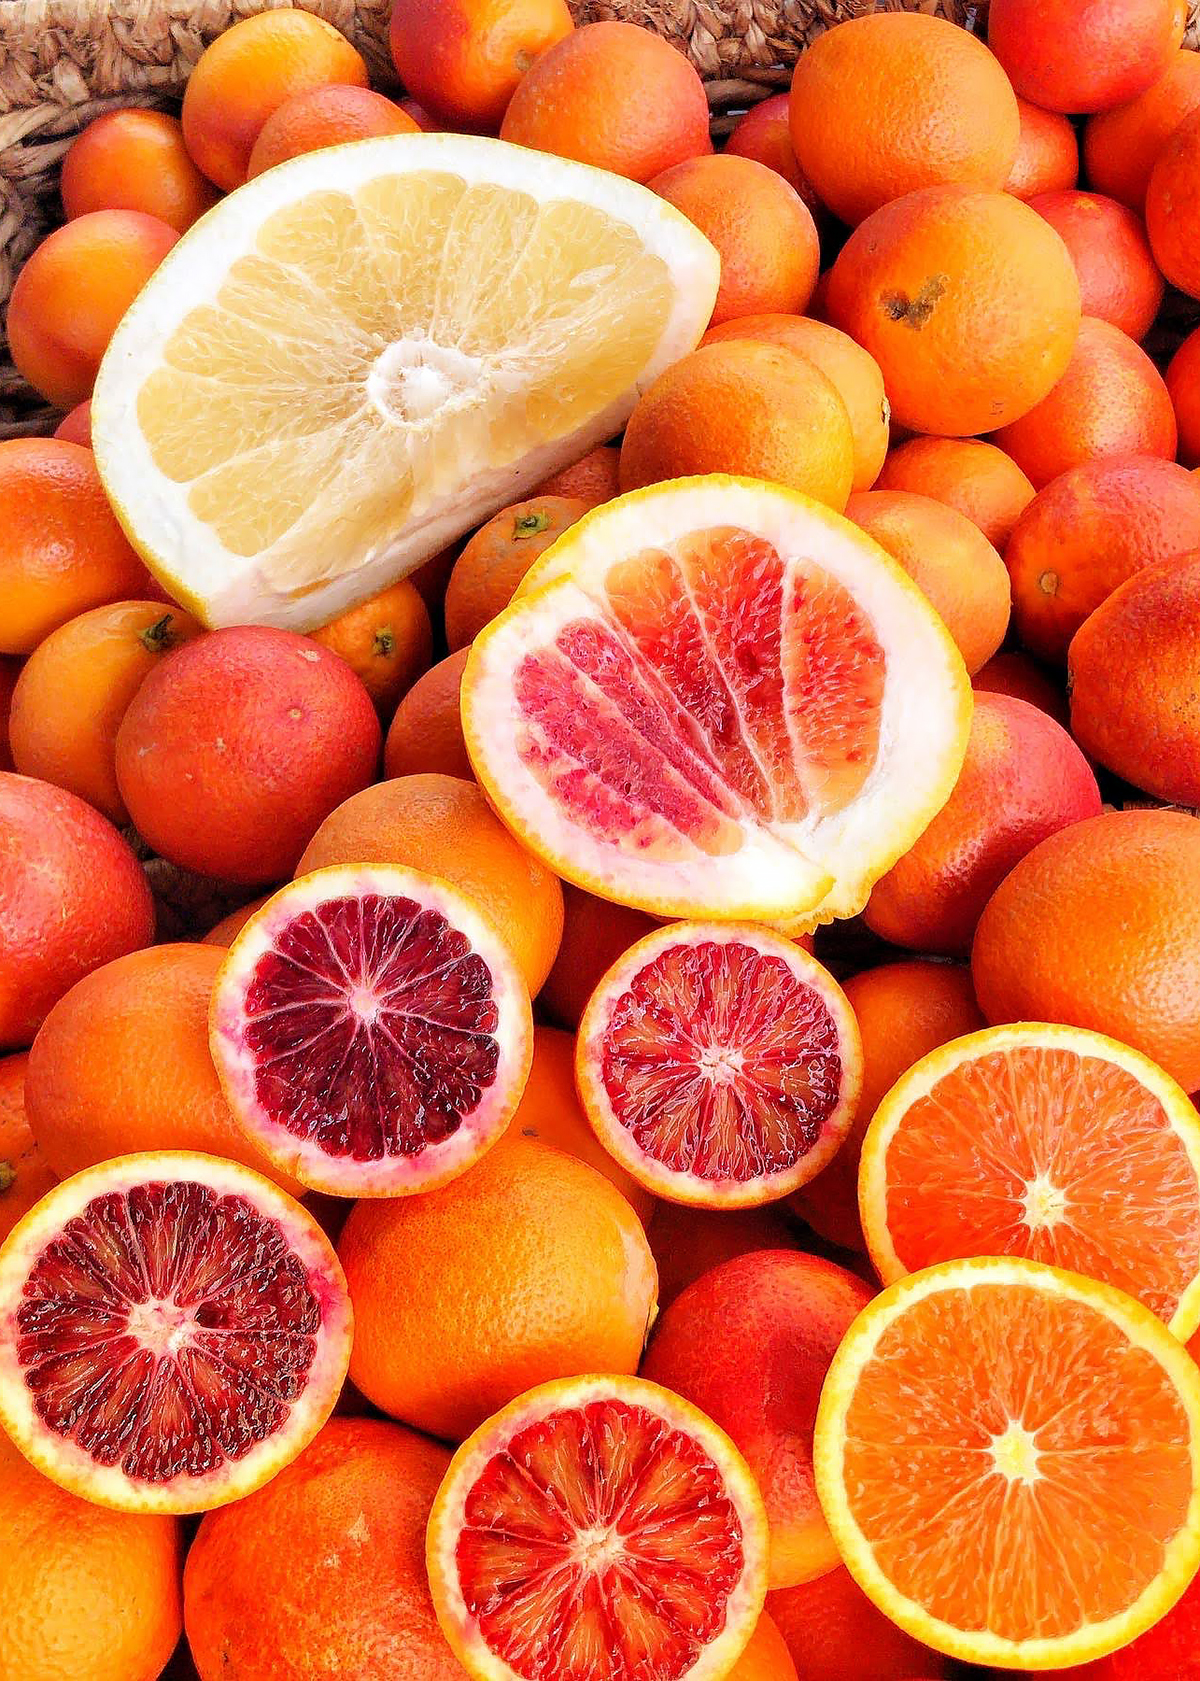 pomelo blood oranges and cara cara oranges at farmers market